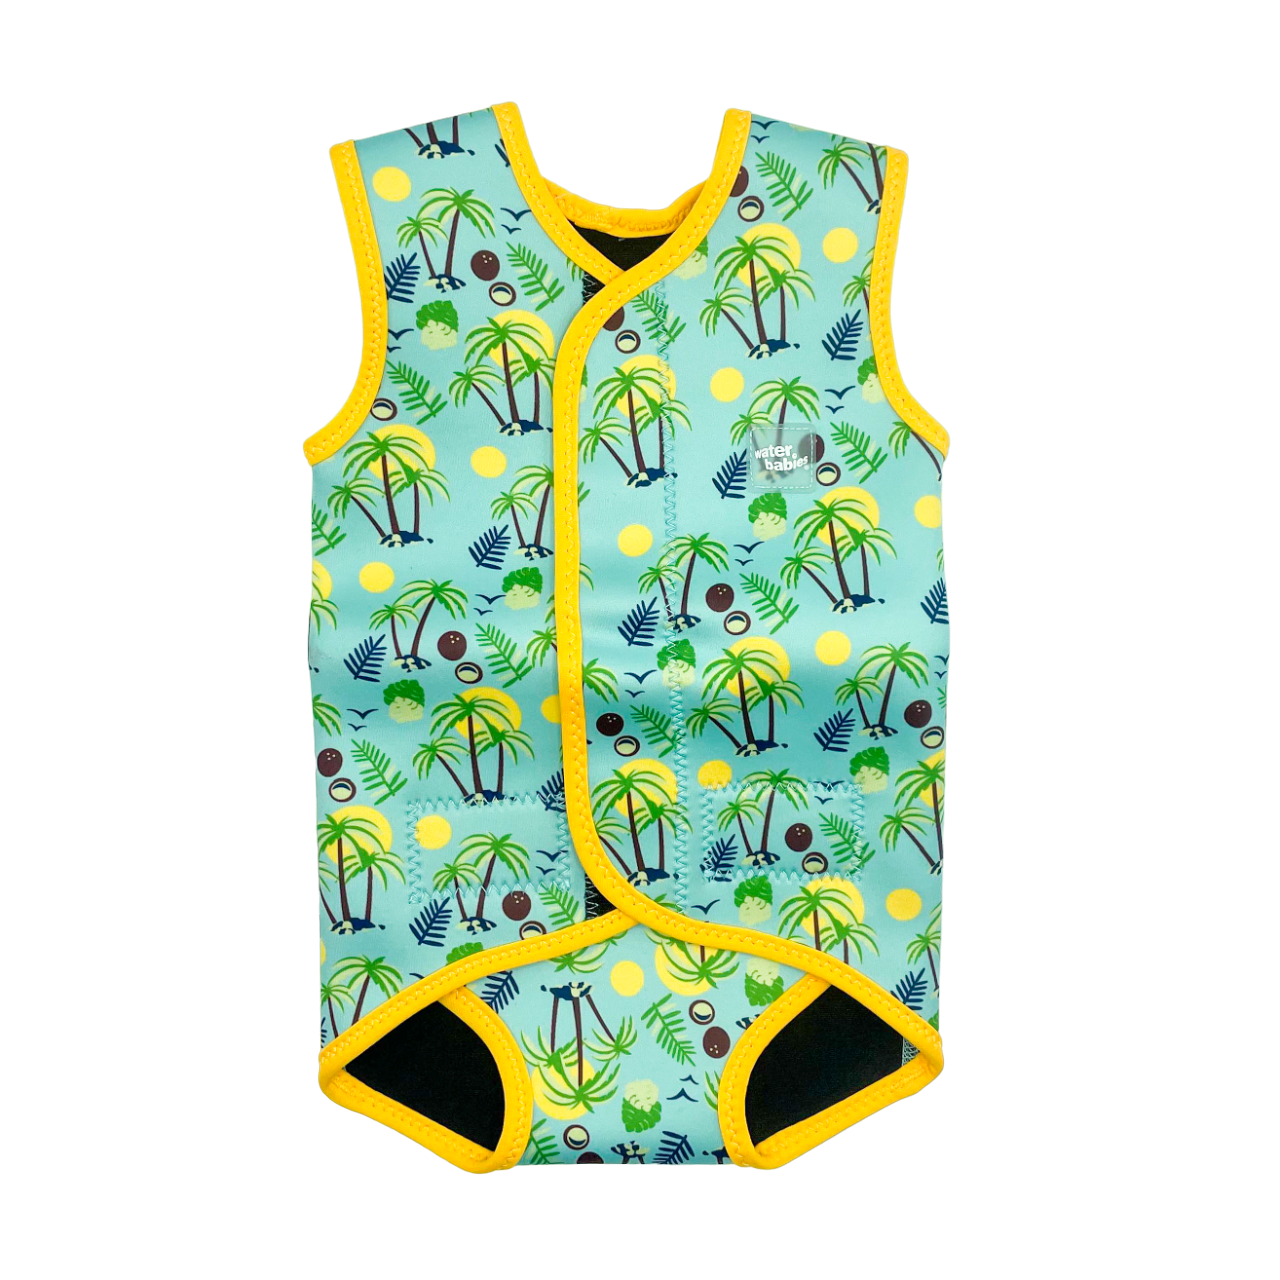 Water Babies Floating Forest Baby Wrap